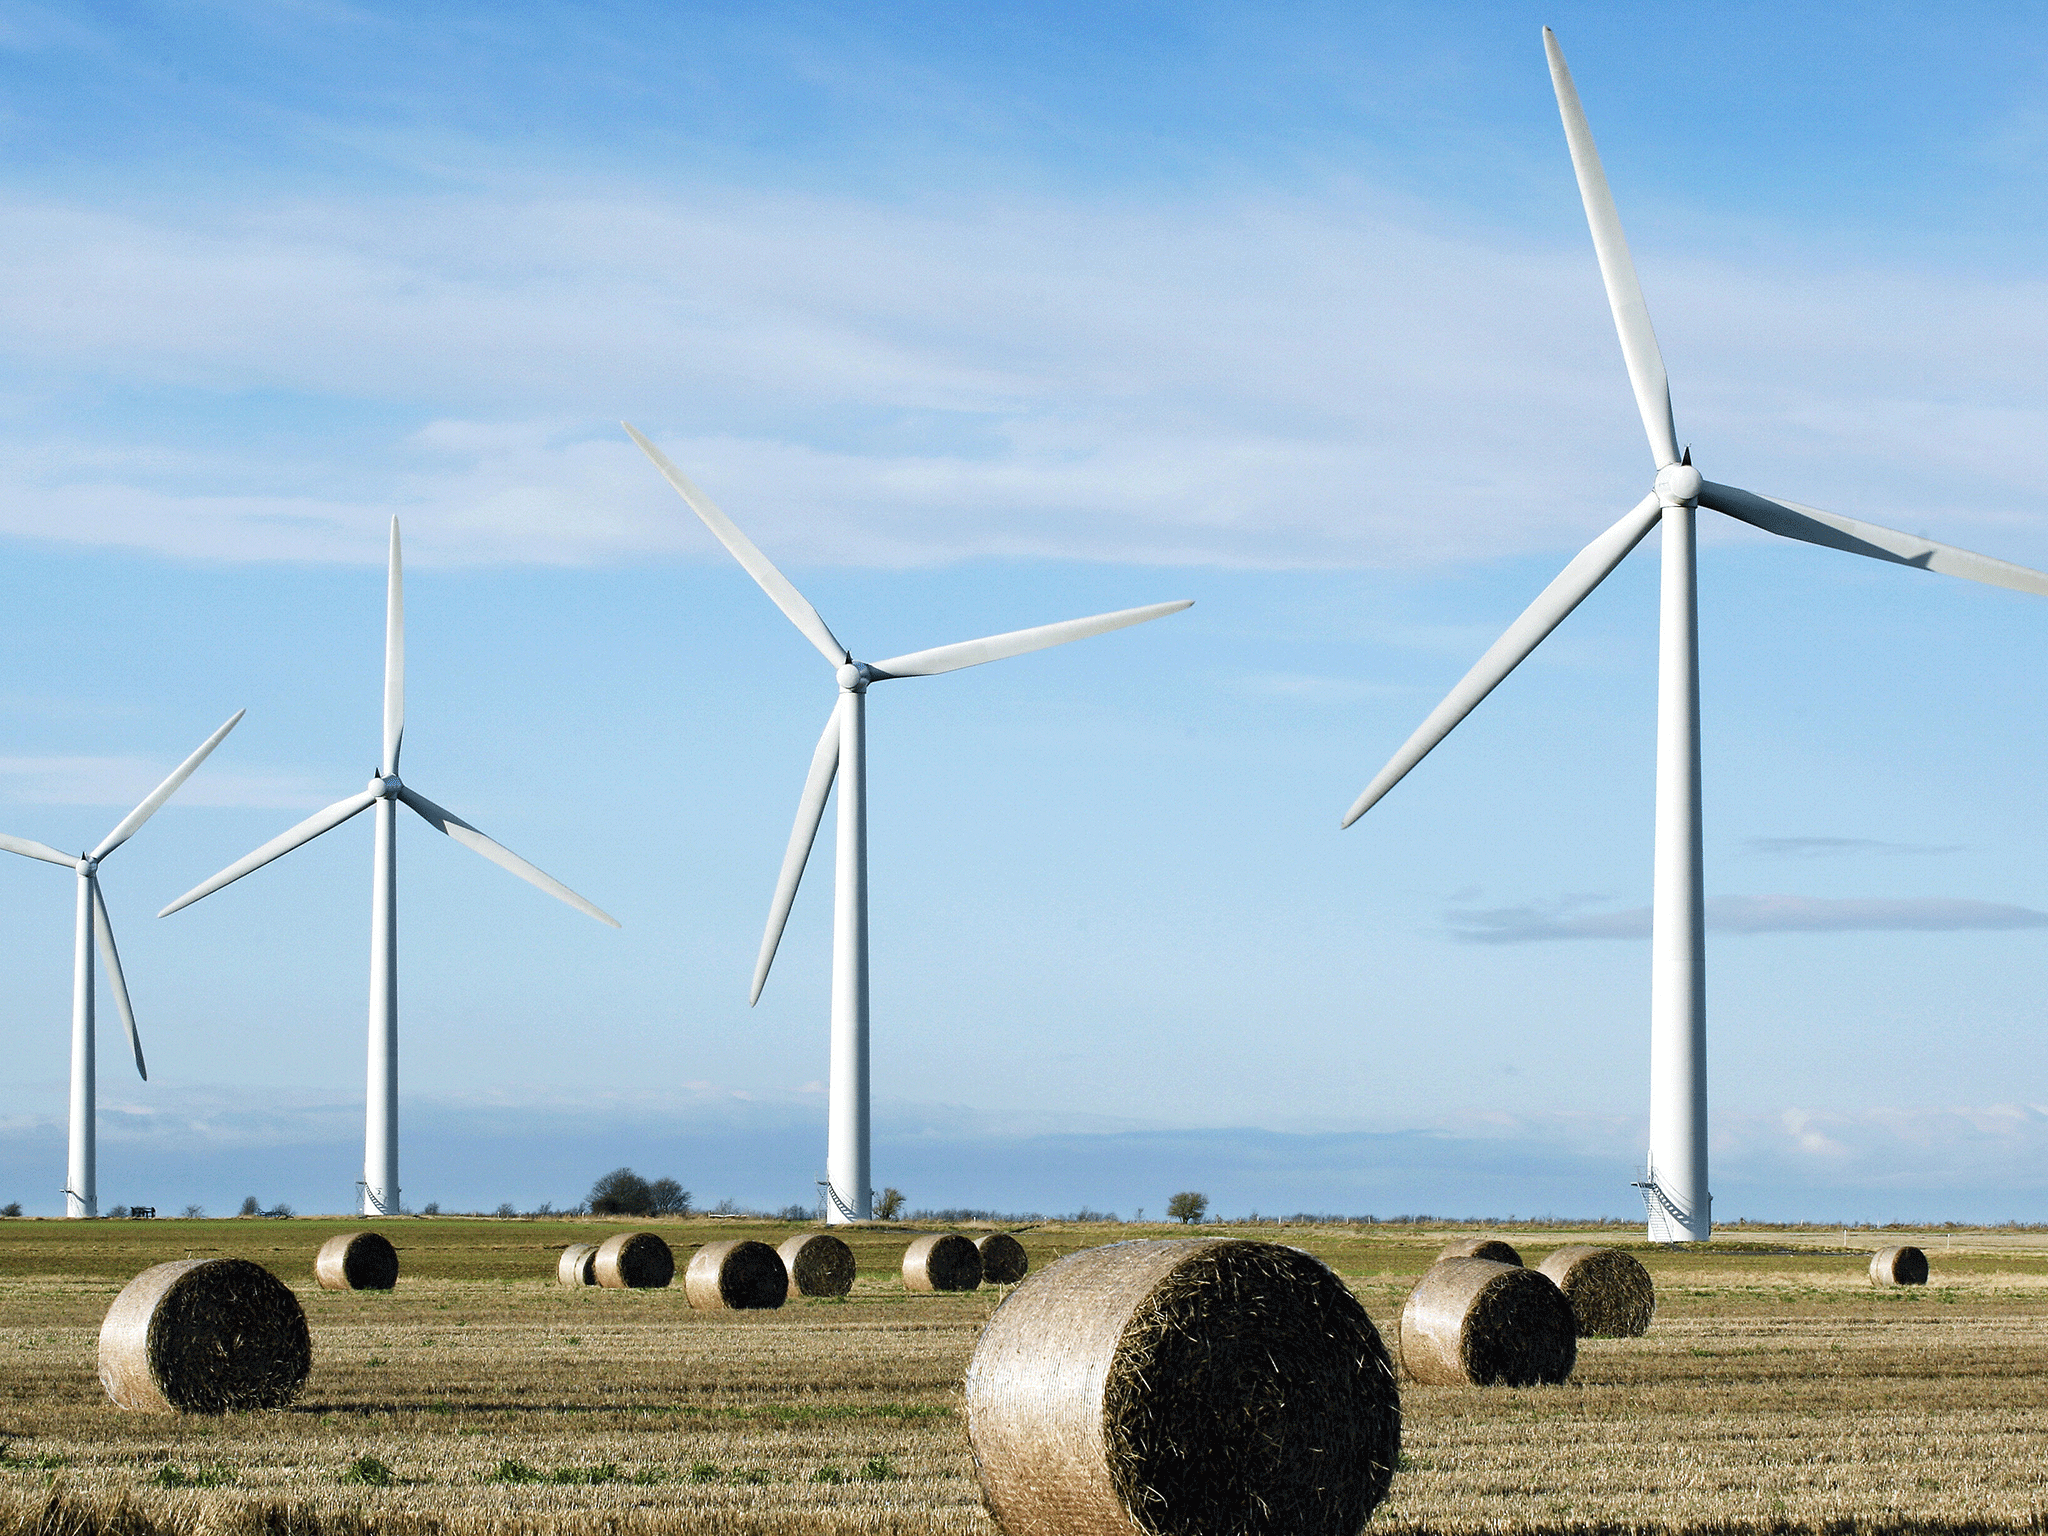 Cutting subsidies for wind power means 250 wind farms are unlikely to be built, energy secretary Amber Rudd said this summer